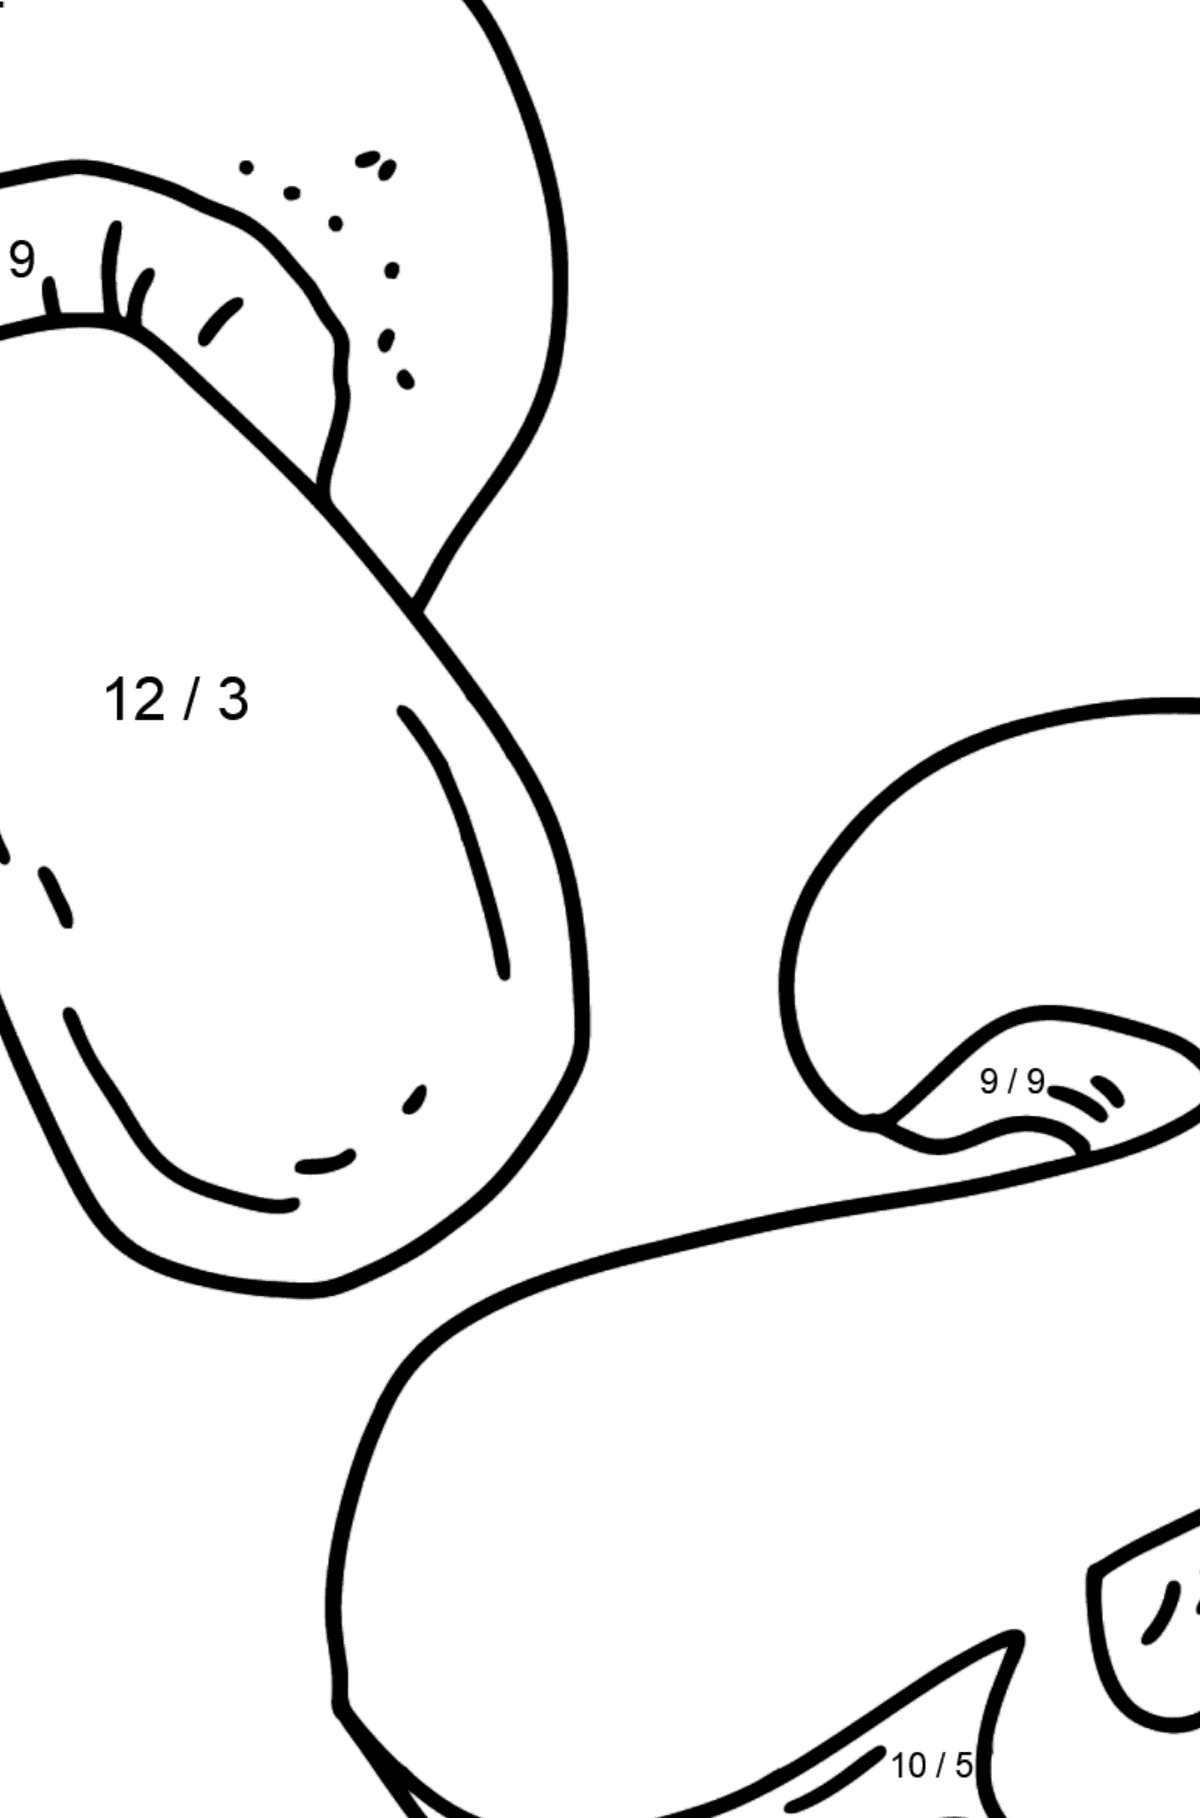 Royal Champignons coloring page - Math Coloring - Division for Kids